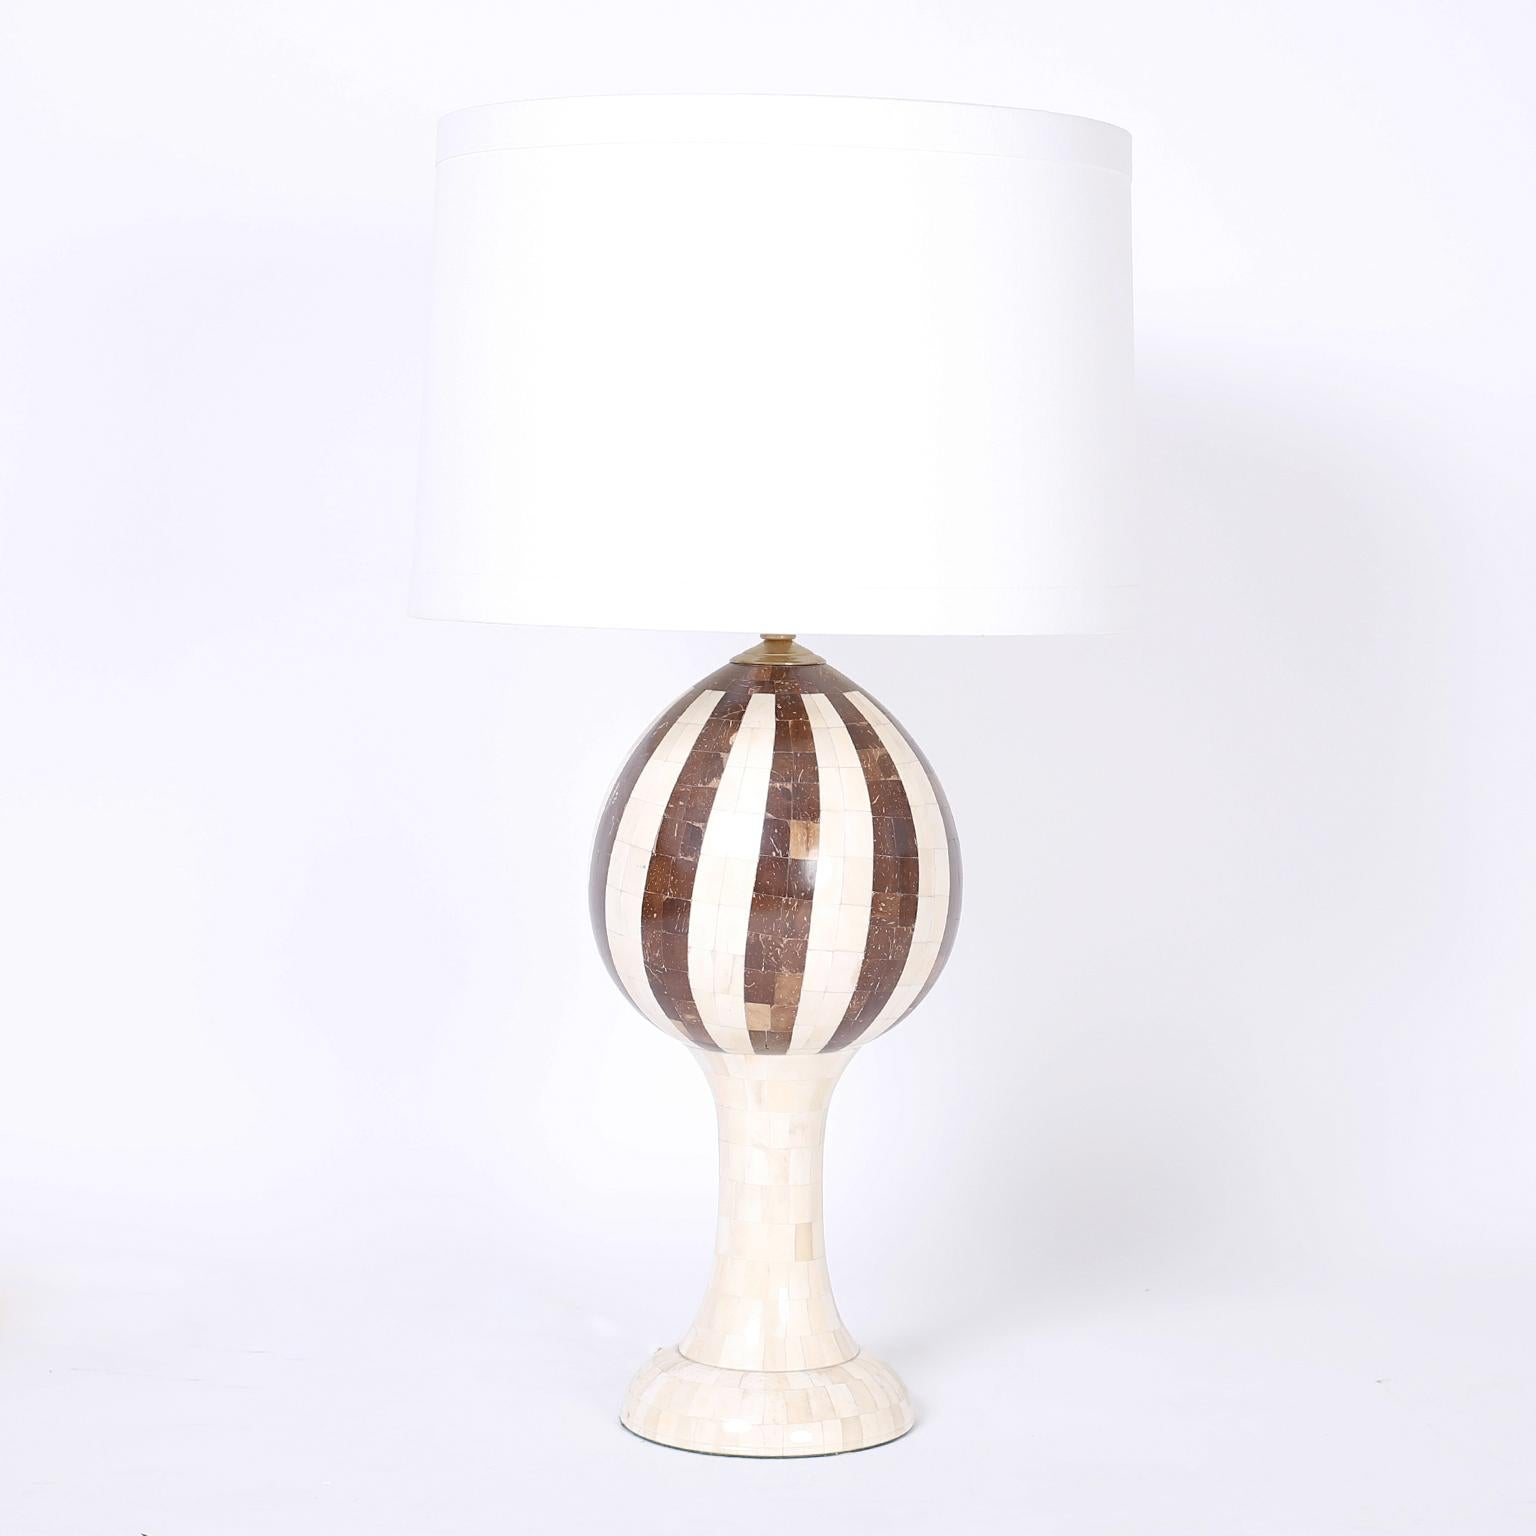 Pair of midcentury table lamps crafted in a mosaic of bone and coconut shell with a Classic gourd form reimagined in a modern spirit.